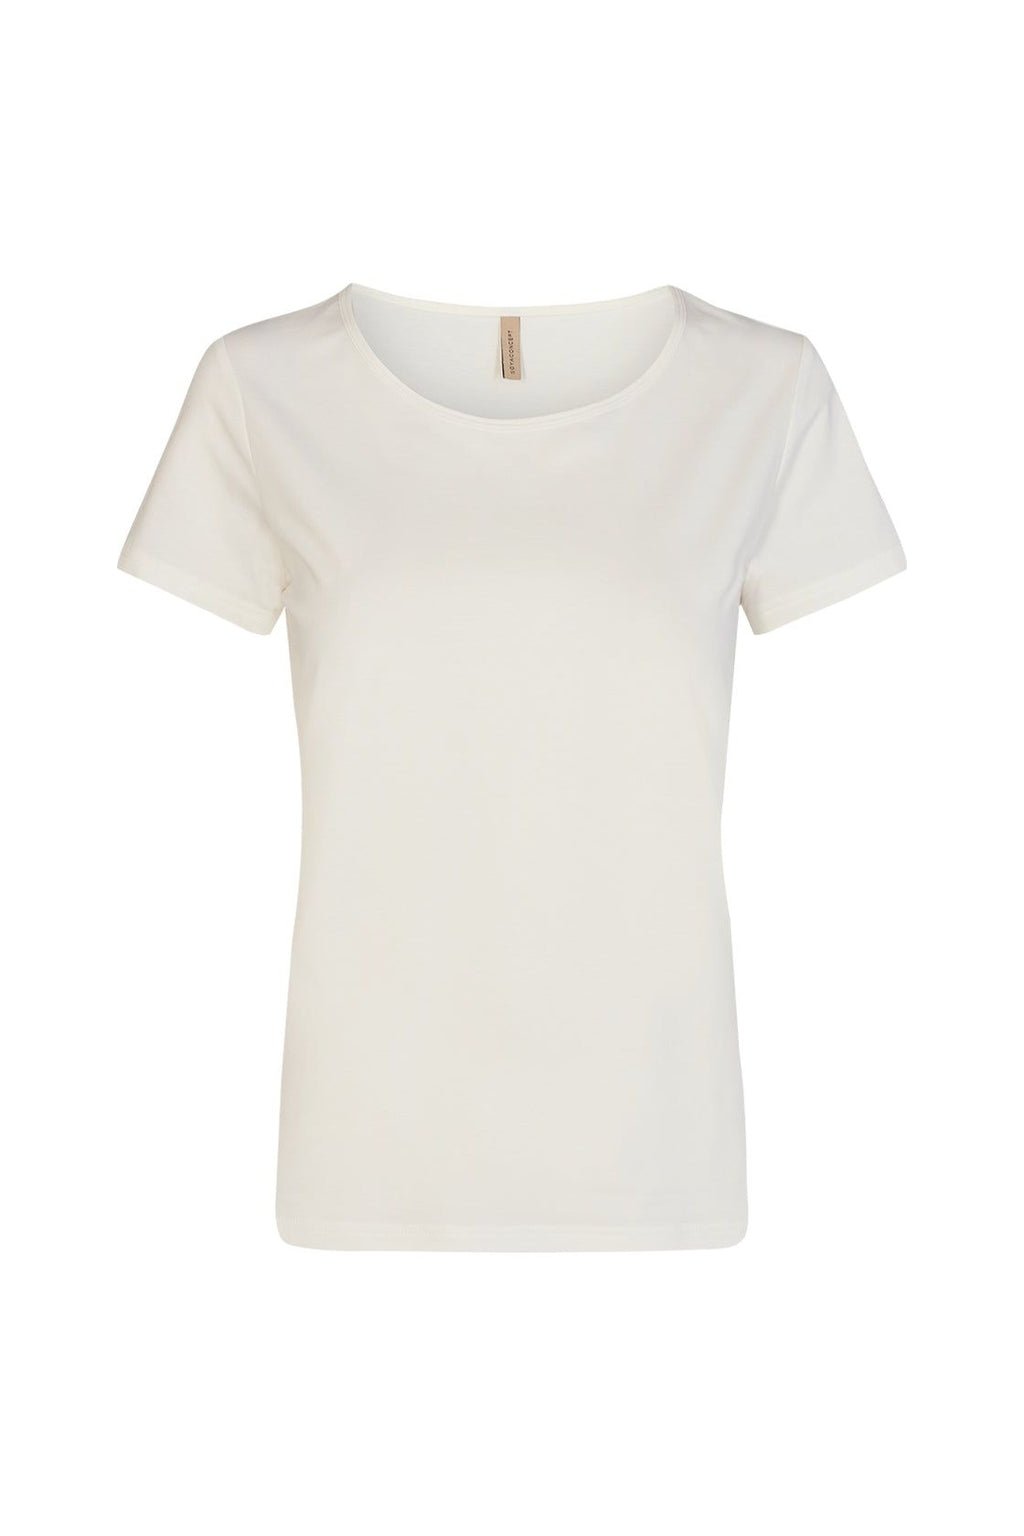 Soya Concept - Ladies Knitted Top - Off White & Frosty Green - P24740